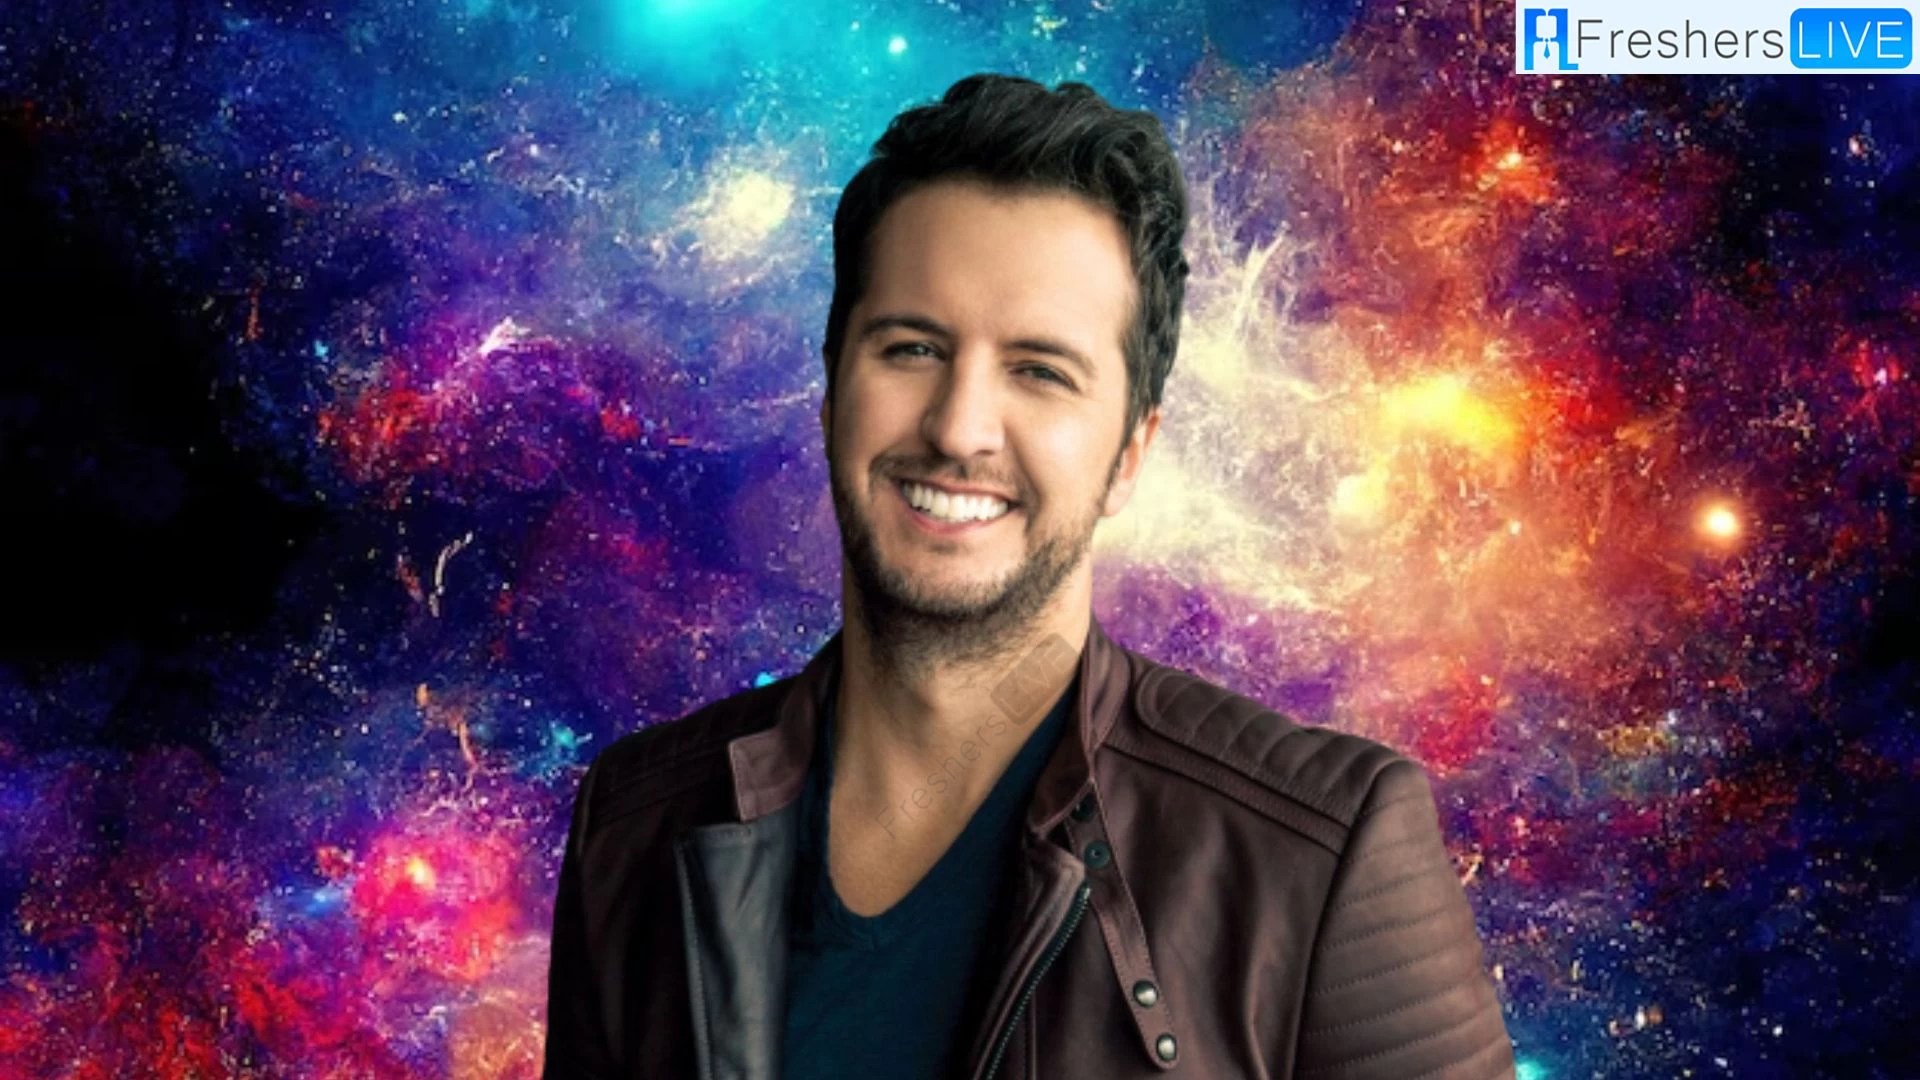 Does Luke Bryan Have Kids? Who is Luke Bryan? Luke Bryan's Age, Family, Parents and More